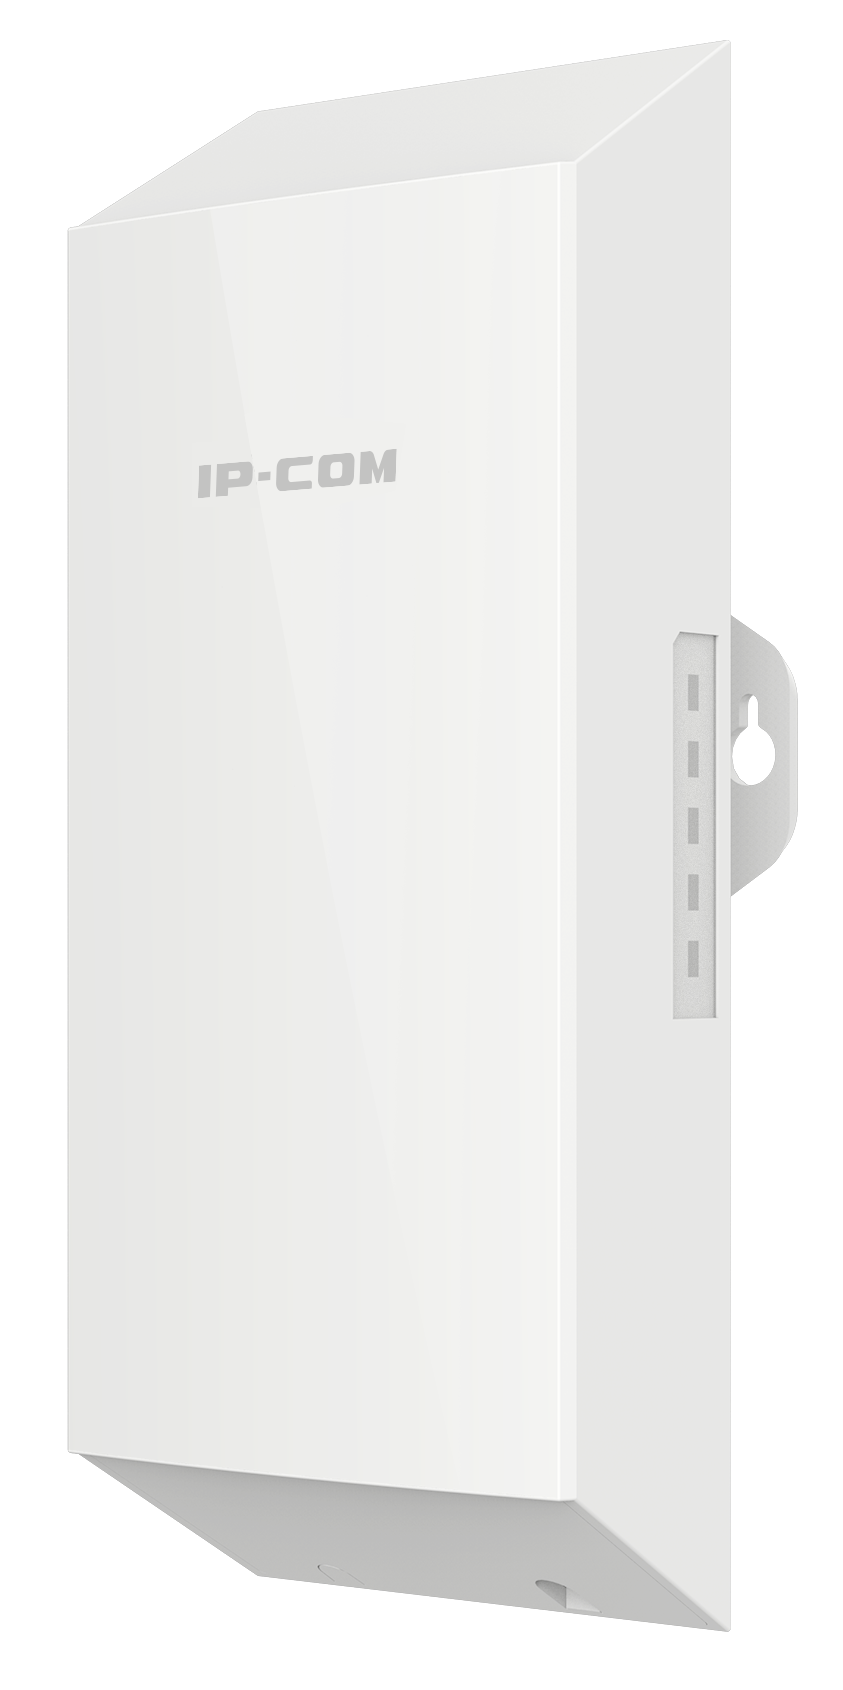 IP-COM 2.4GHz OUTDOOR CPE 8dBi DIRECTIONAL ANTENNA AUTO-BRIDGING 1 x ETHERNET IP65 300Mbps UPTO 30M POLE MOUNTED WHITE PASSIVE POE 9-12VDC